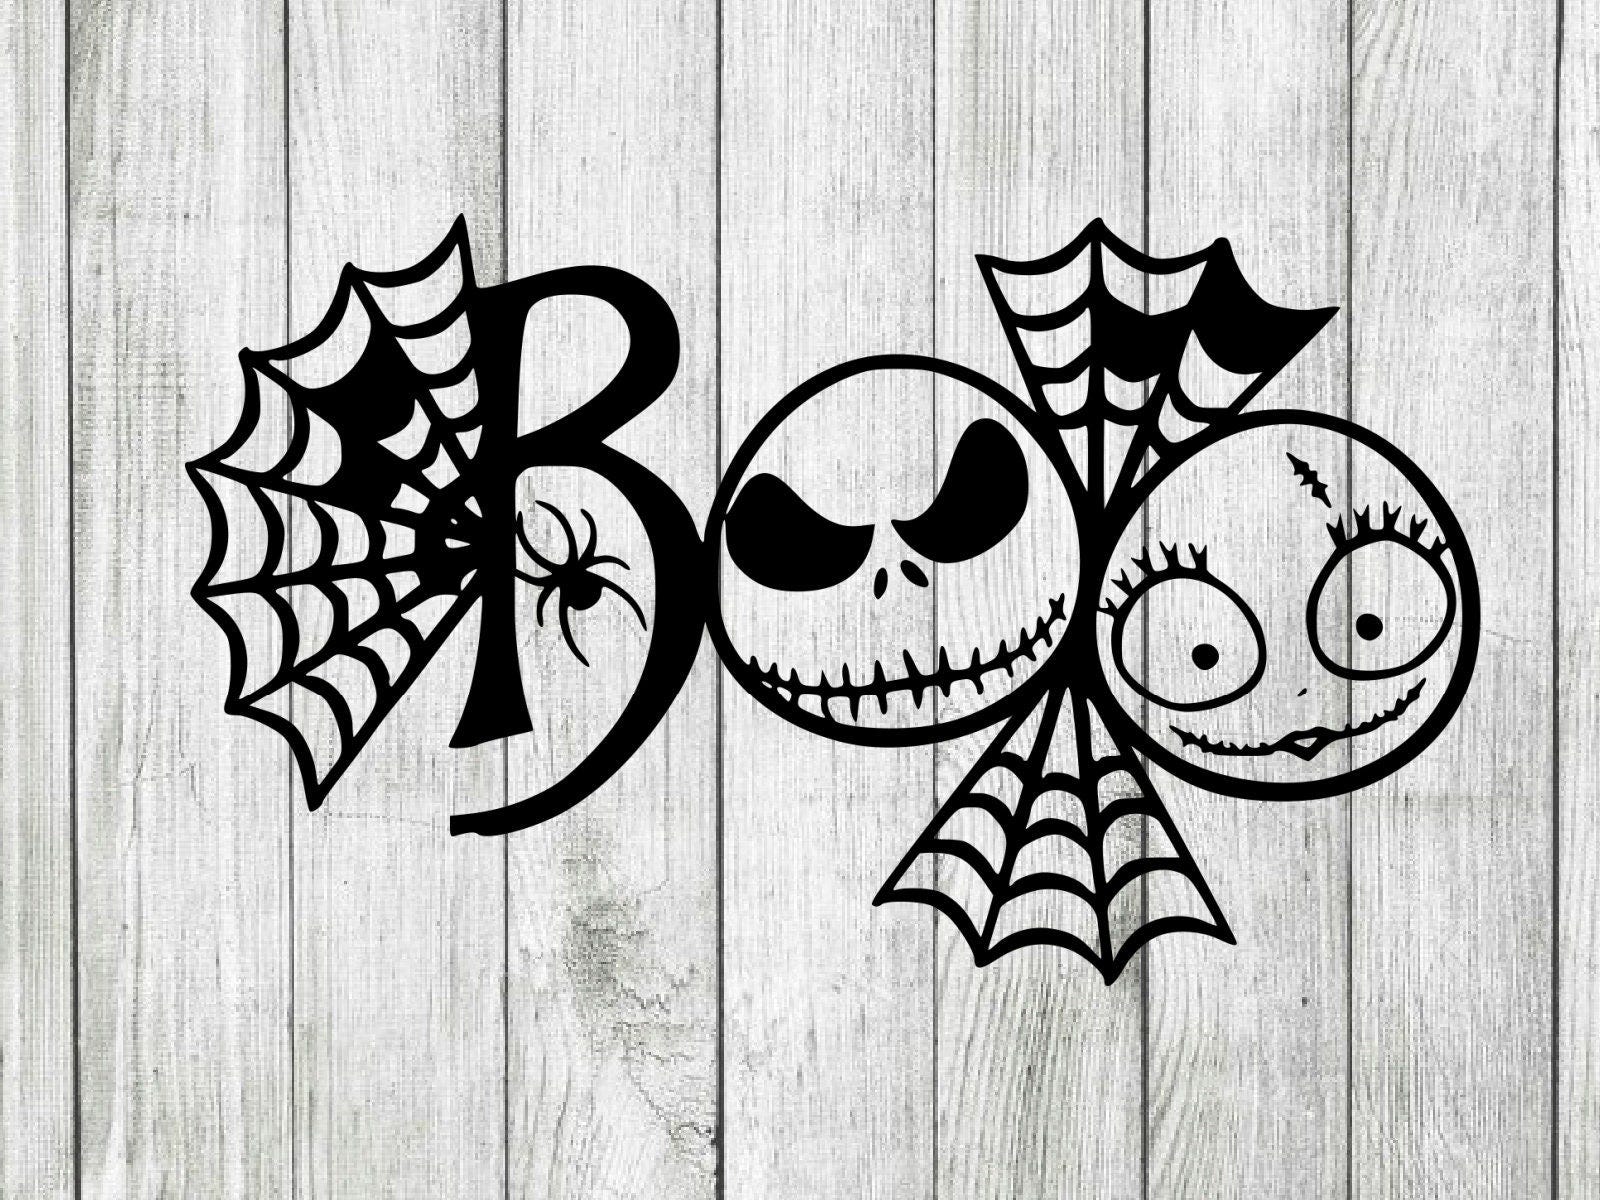 Jack and sally svg, jack skellington svg, A nightmare before christmas svg, cutting files for cricut silhouette, INSTANT DOWNLOAD